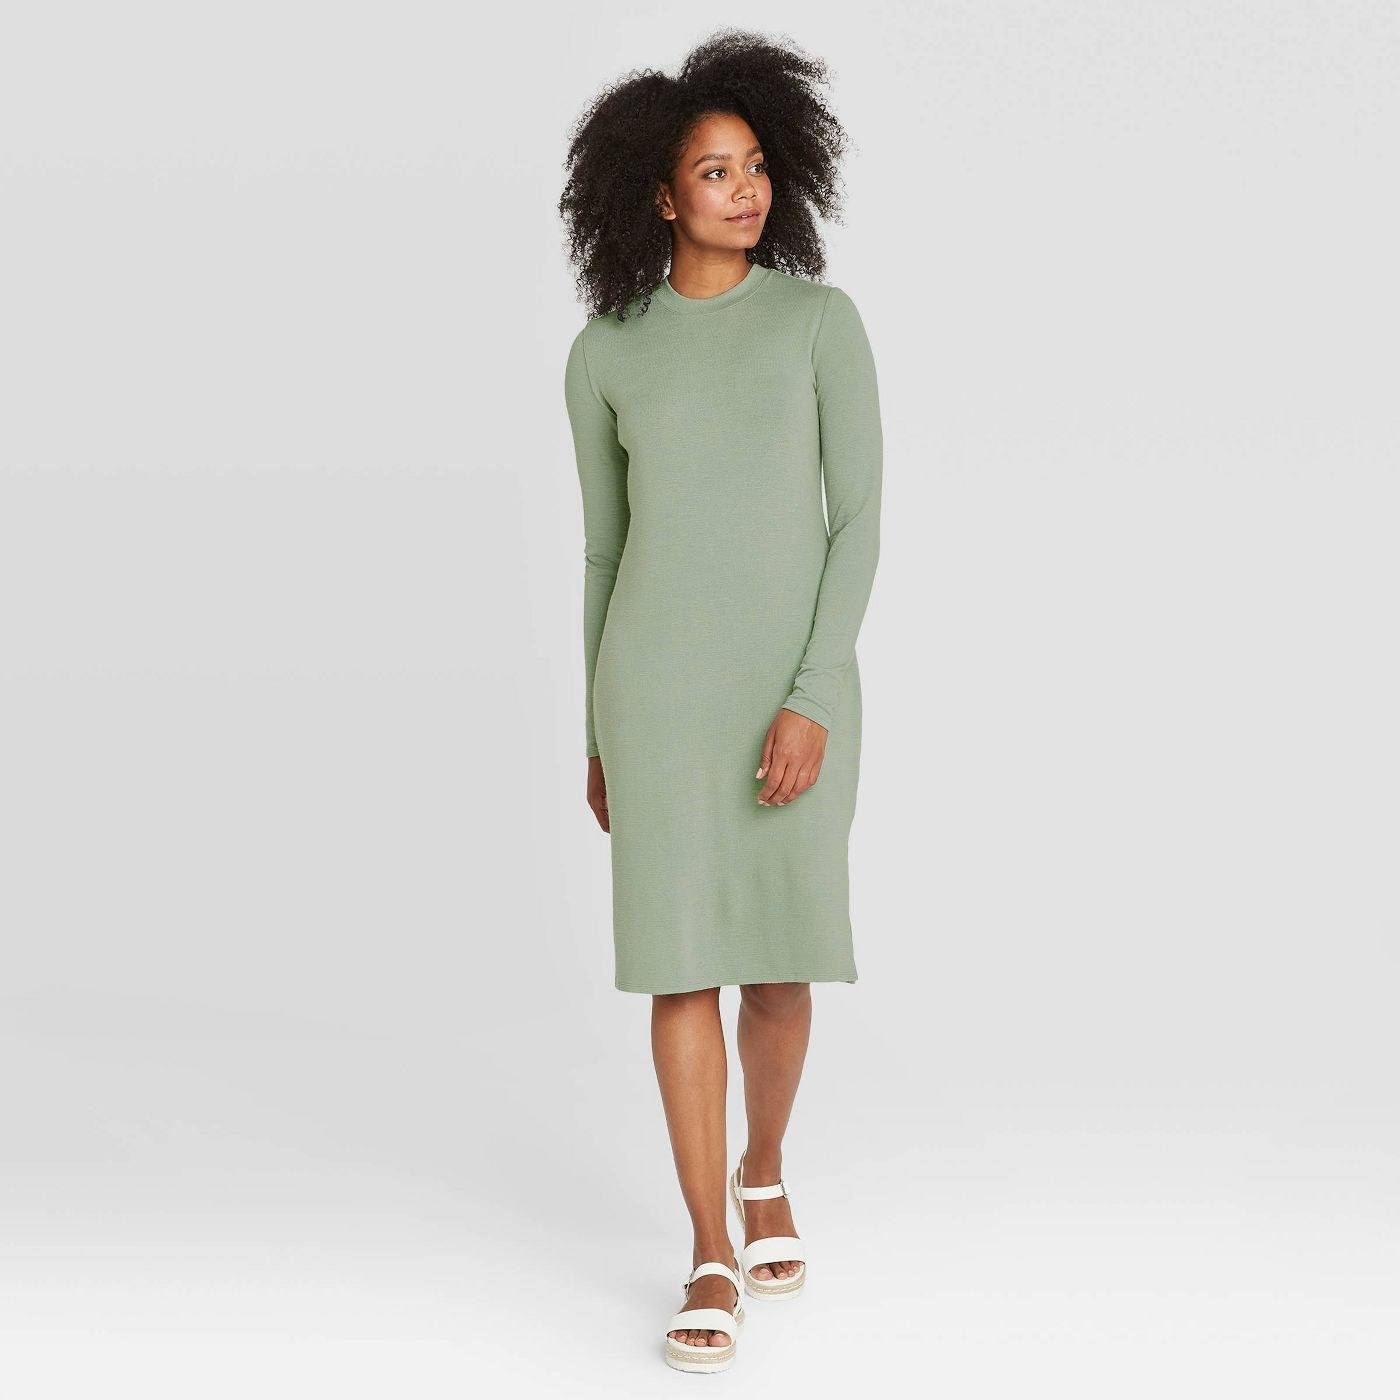 Model in long sleeved pale green dress that falls at knee 